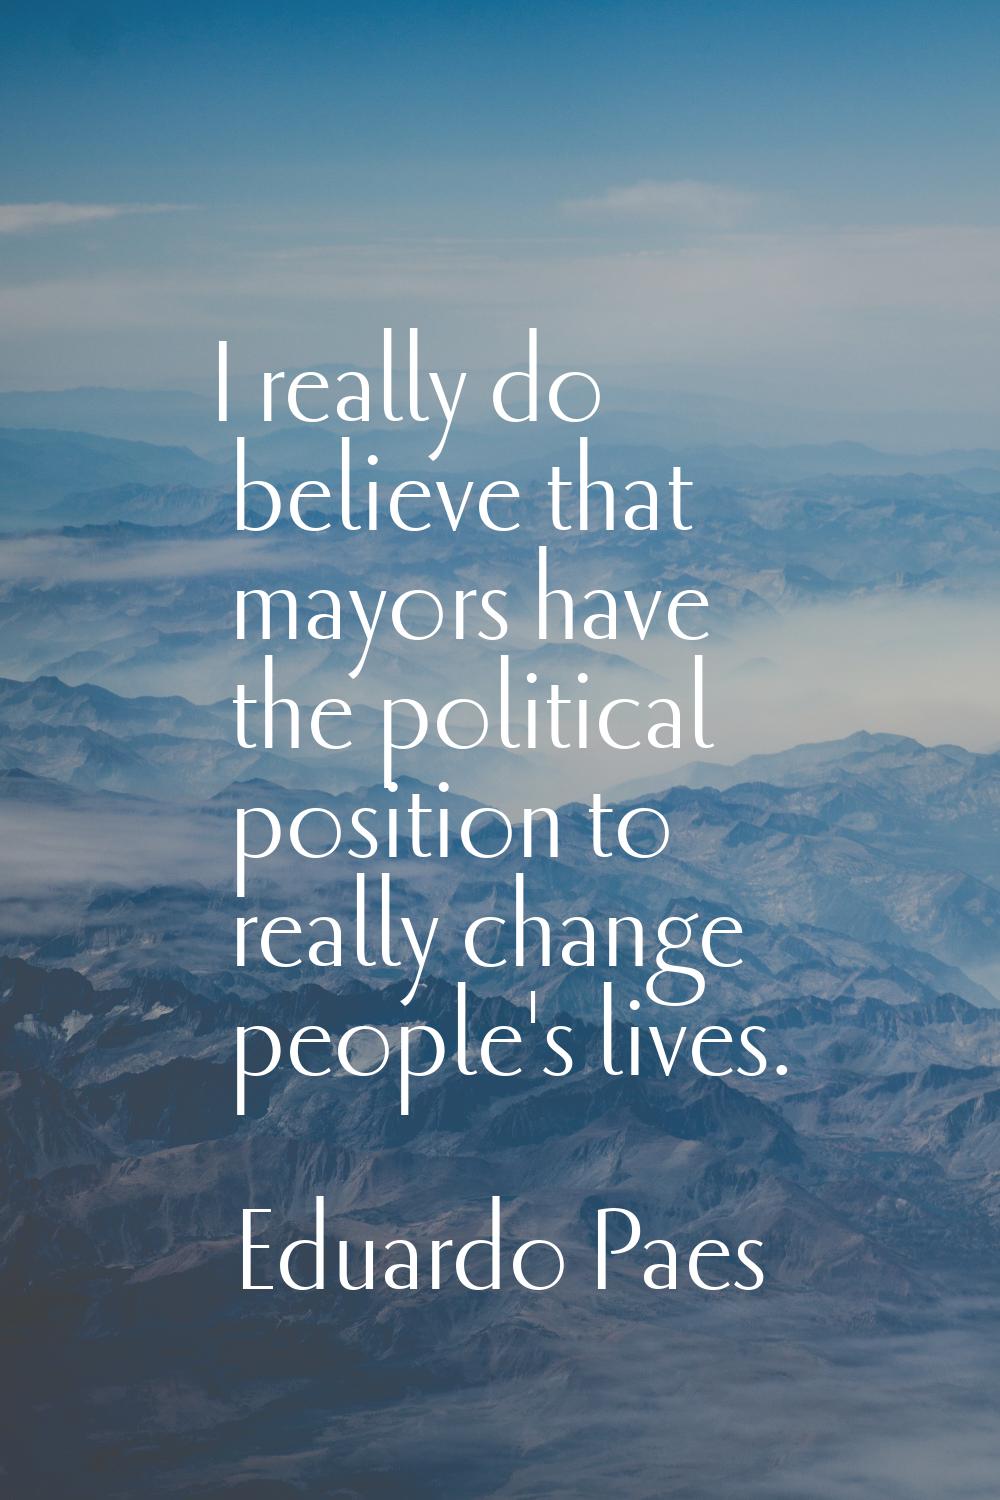 I really do believe that mayors have the political position to really change people's lives.